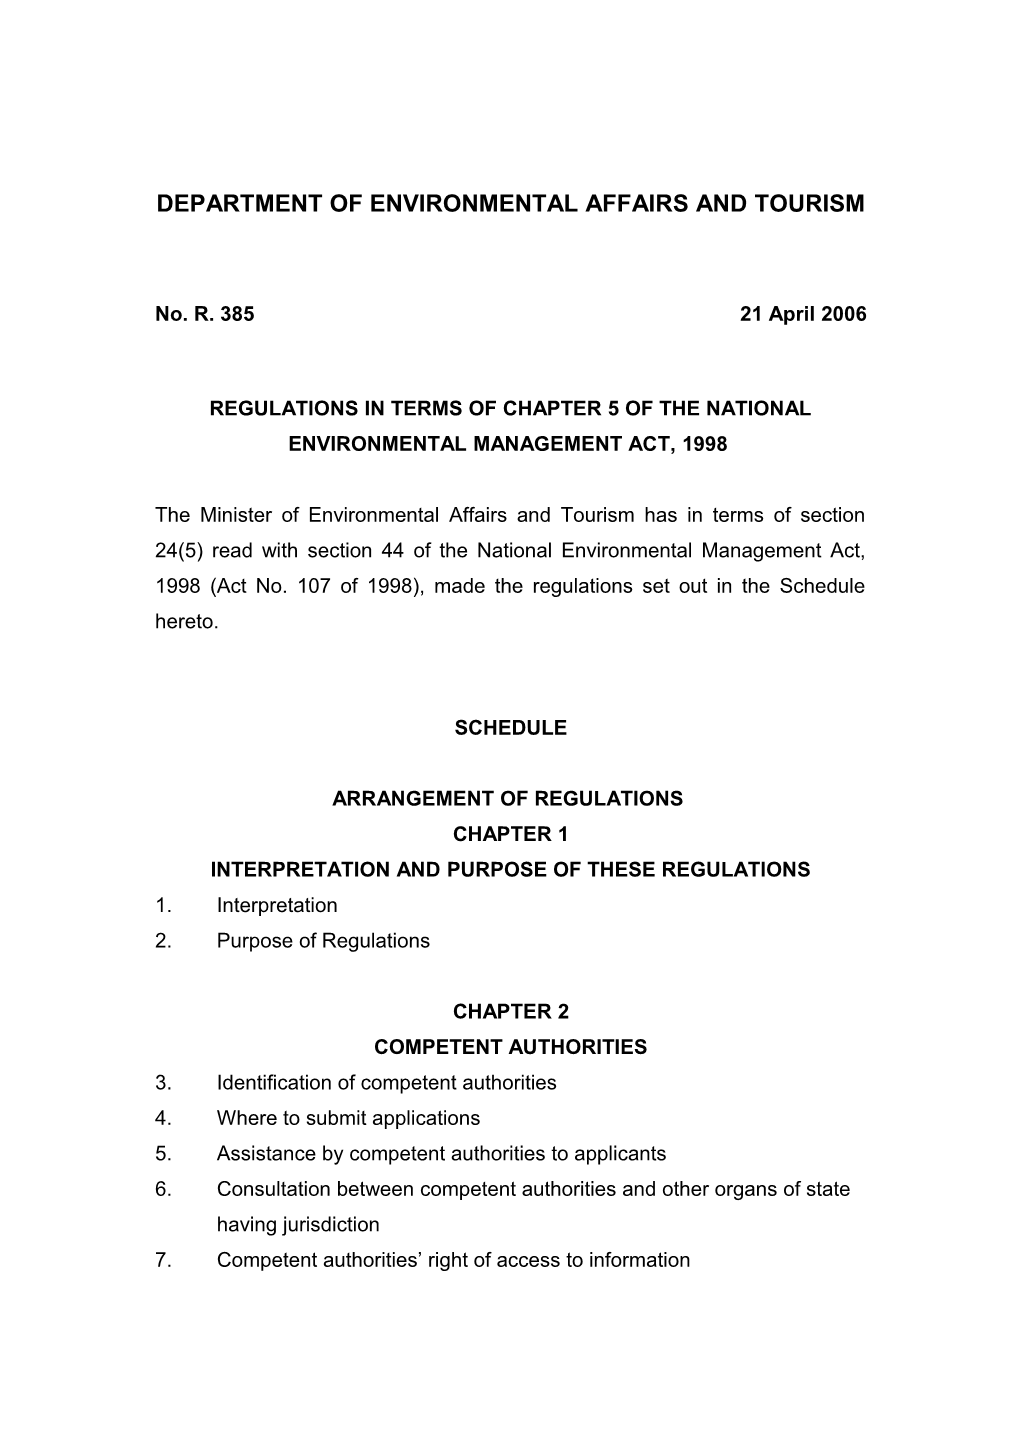 Regulations in Terms of Chapter 5 of the National Environmental Management Act, 1998